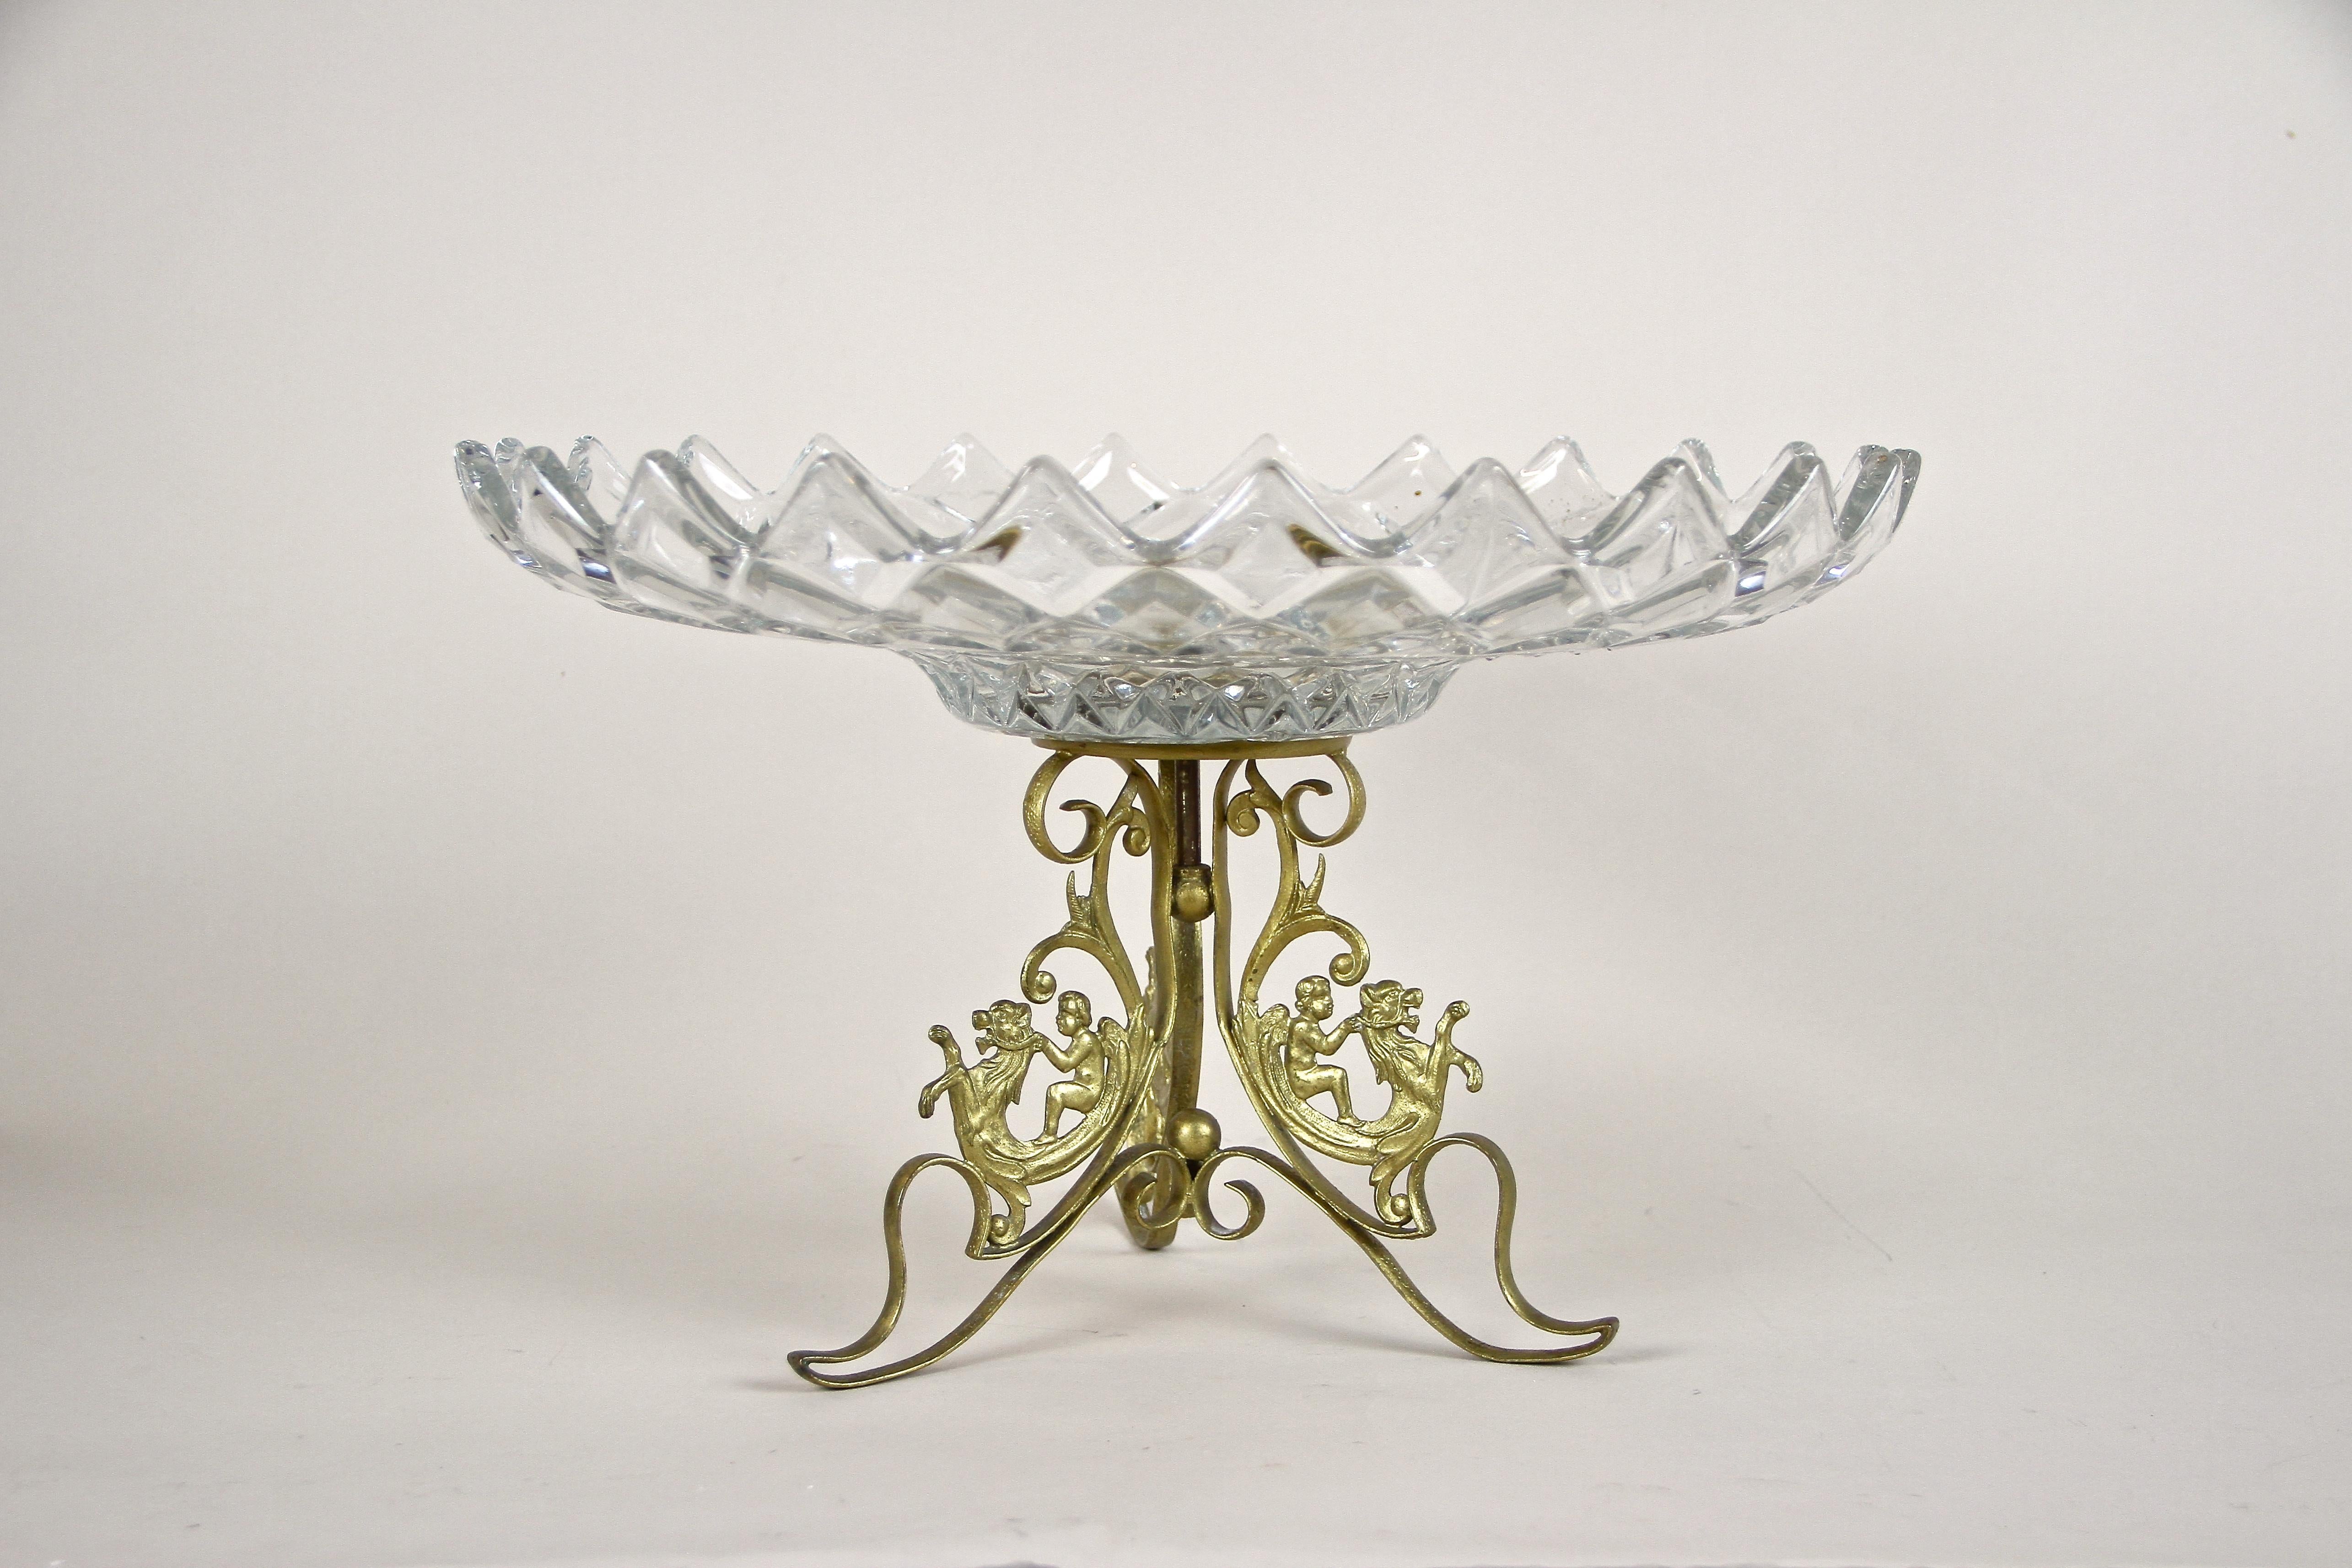 Delicate Art Nouveau centerpiece with wide cut glass bowl on top. Artfully designed in the period around 1910 in France, this lovely centerpiece impresses with a beautiful curved fire-gilt brass base depicting angels riding on mythical creatures.